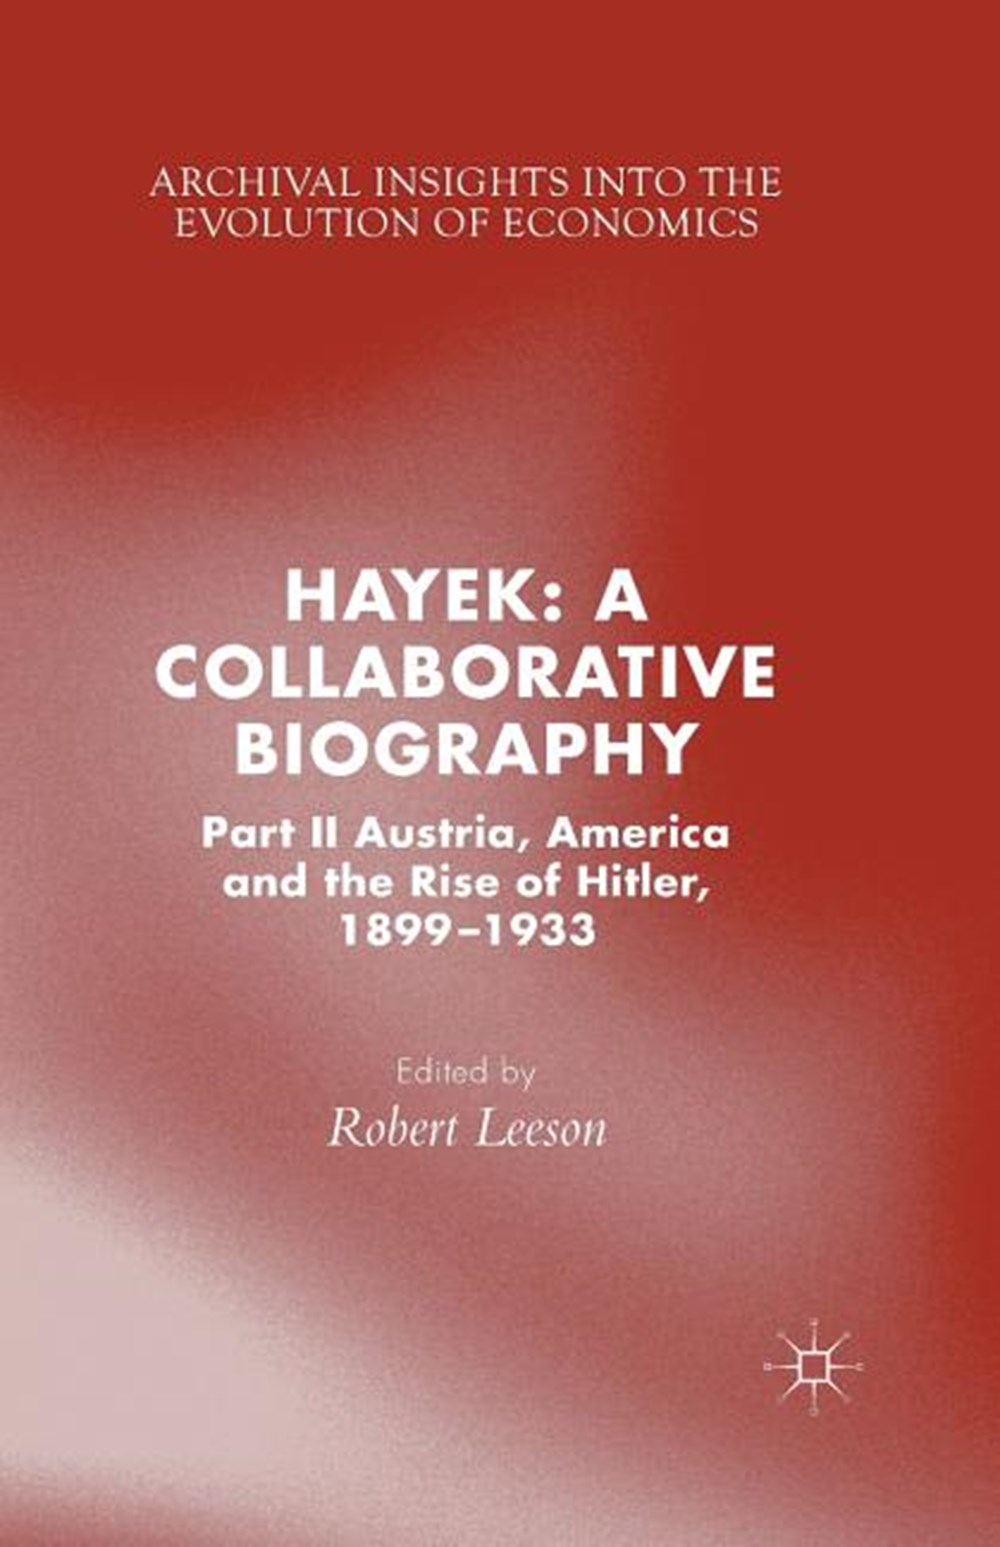 Hayek: A Collaborative Biography: Part II, Austria, America and the Rise of Hitler, 1899-1933 (2015)